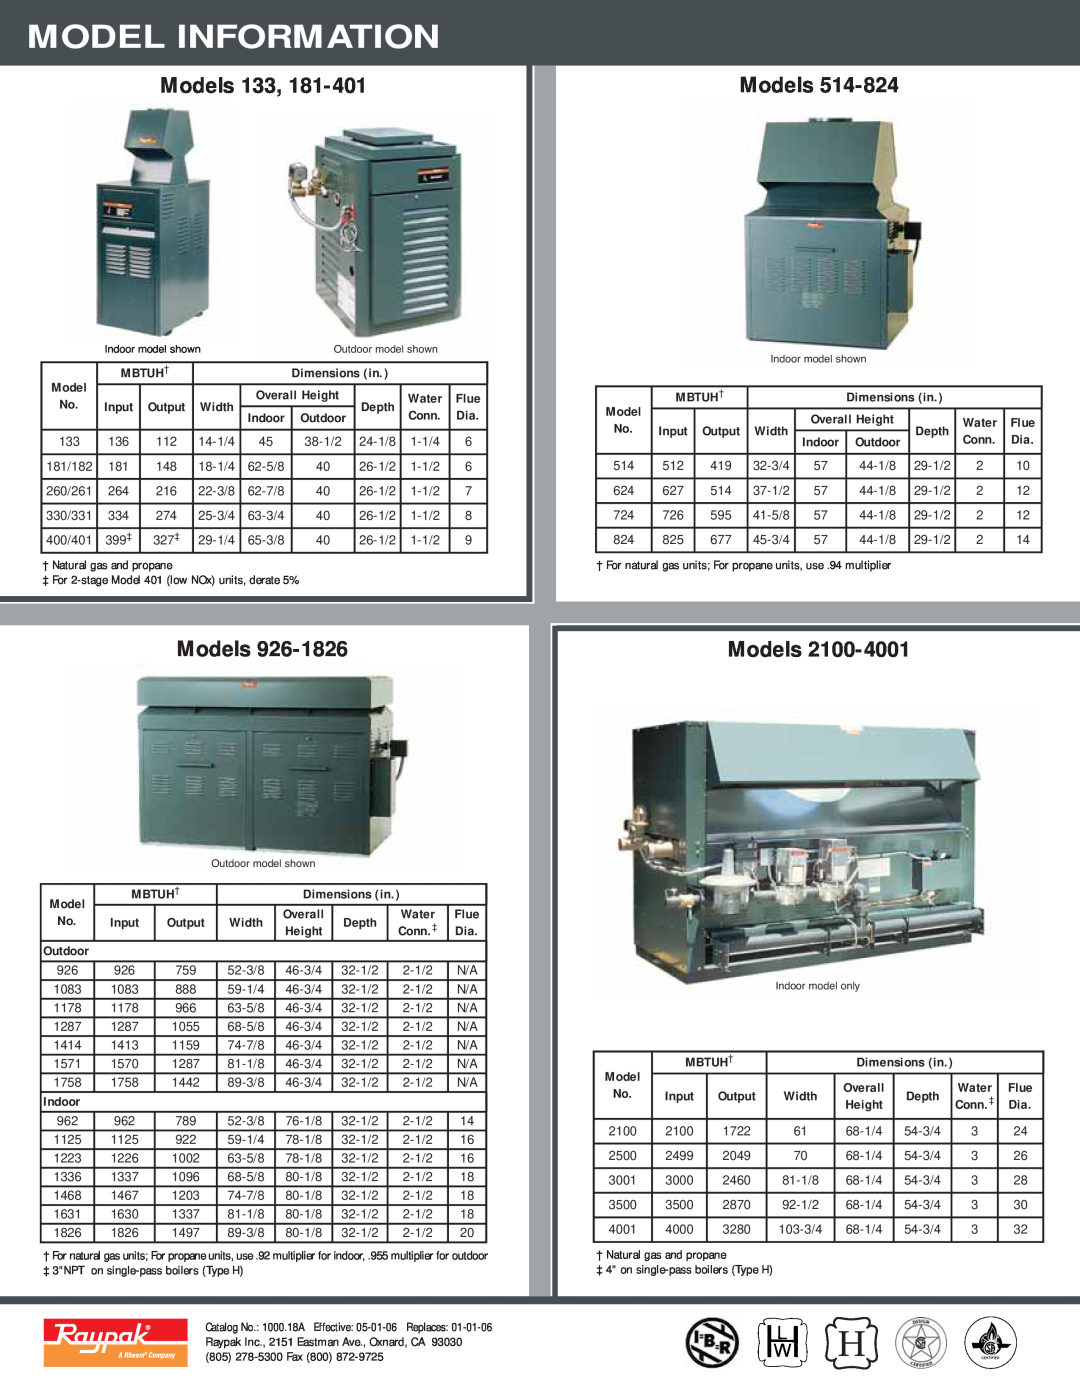 Raypak Commercial Boilers And Water Heater Model Information, Models, Mbtuh†, Dimensions in, Input, Output, Width, Depth 